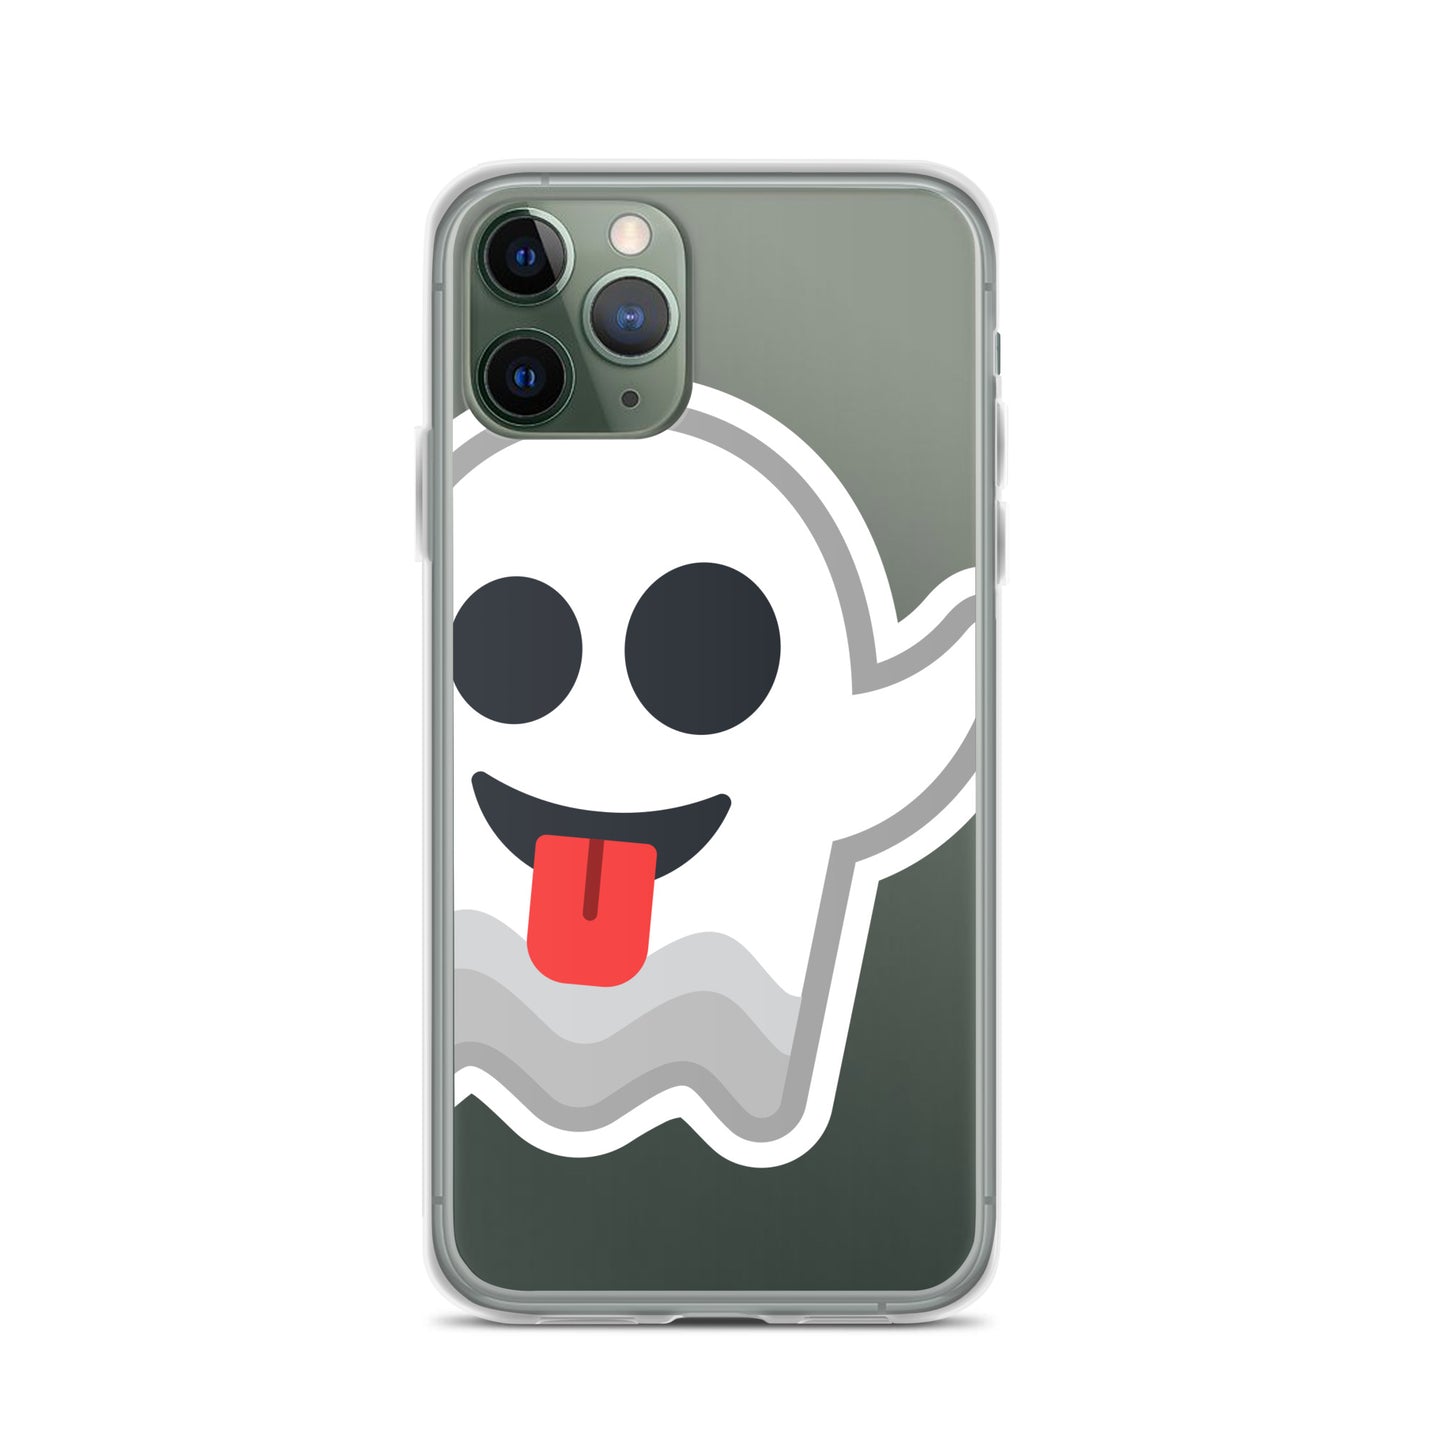 Ghost iPhone Case